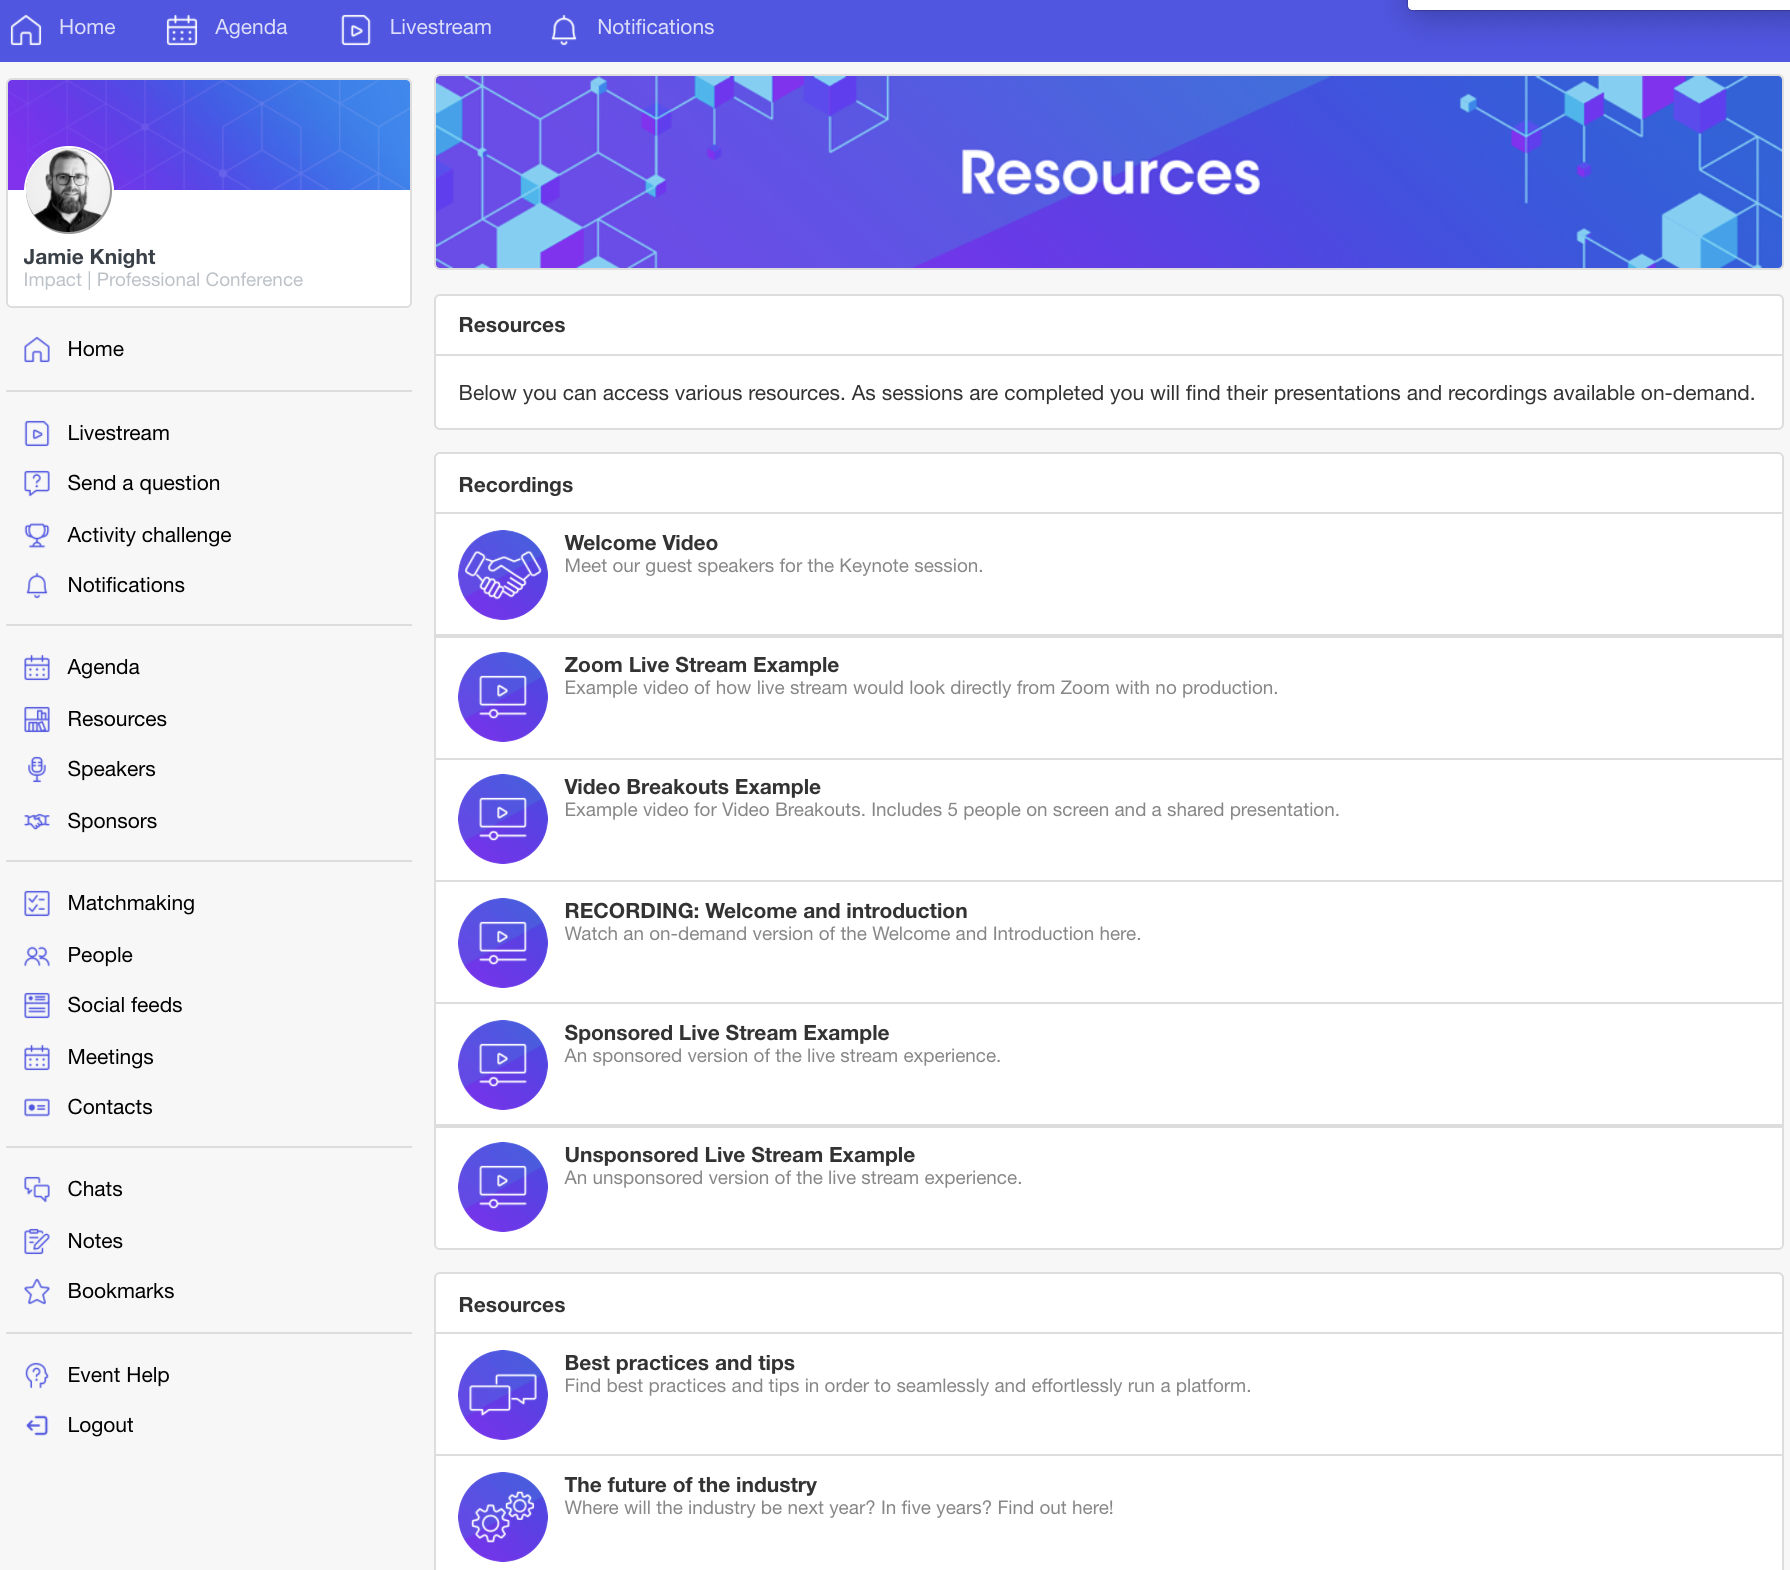 Resources_page.png